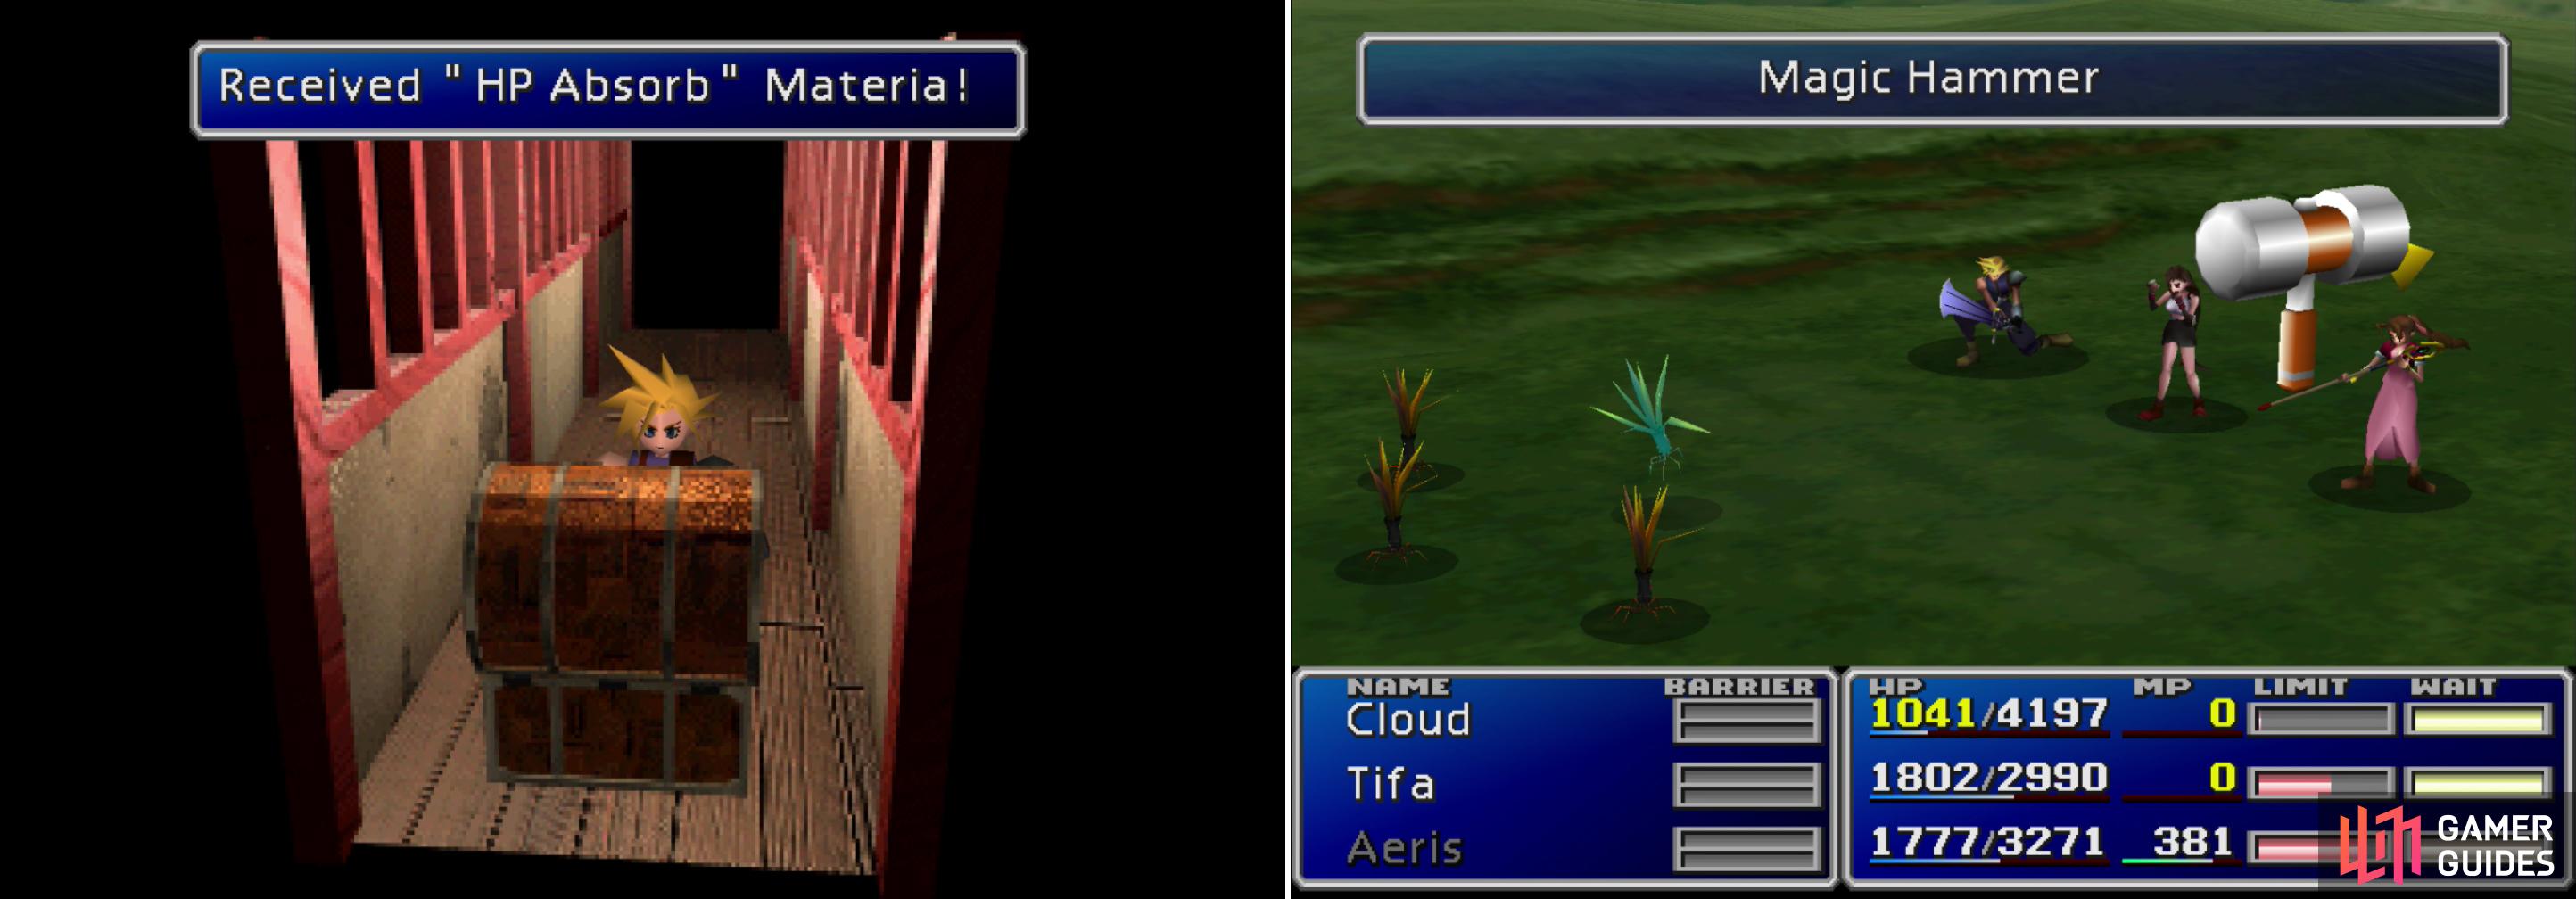 After recovering your Materia, find the HP Absorb Materia in the cat-filled house (left). Learn the Magic Hammer Enemy Skill from the Razor Weeds that dwell upon the grasslands outside of Wuiai (right).